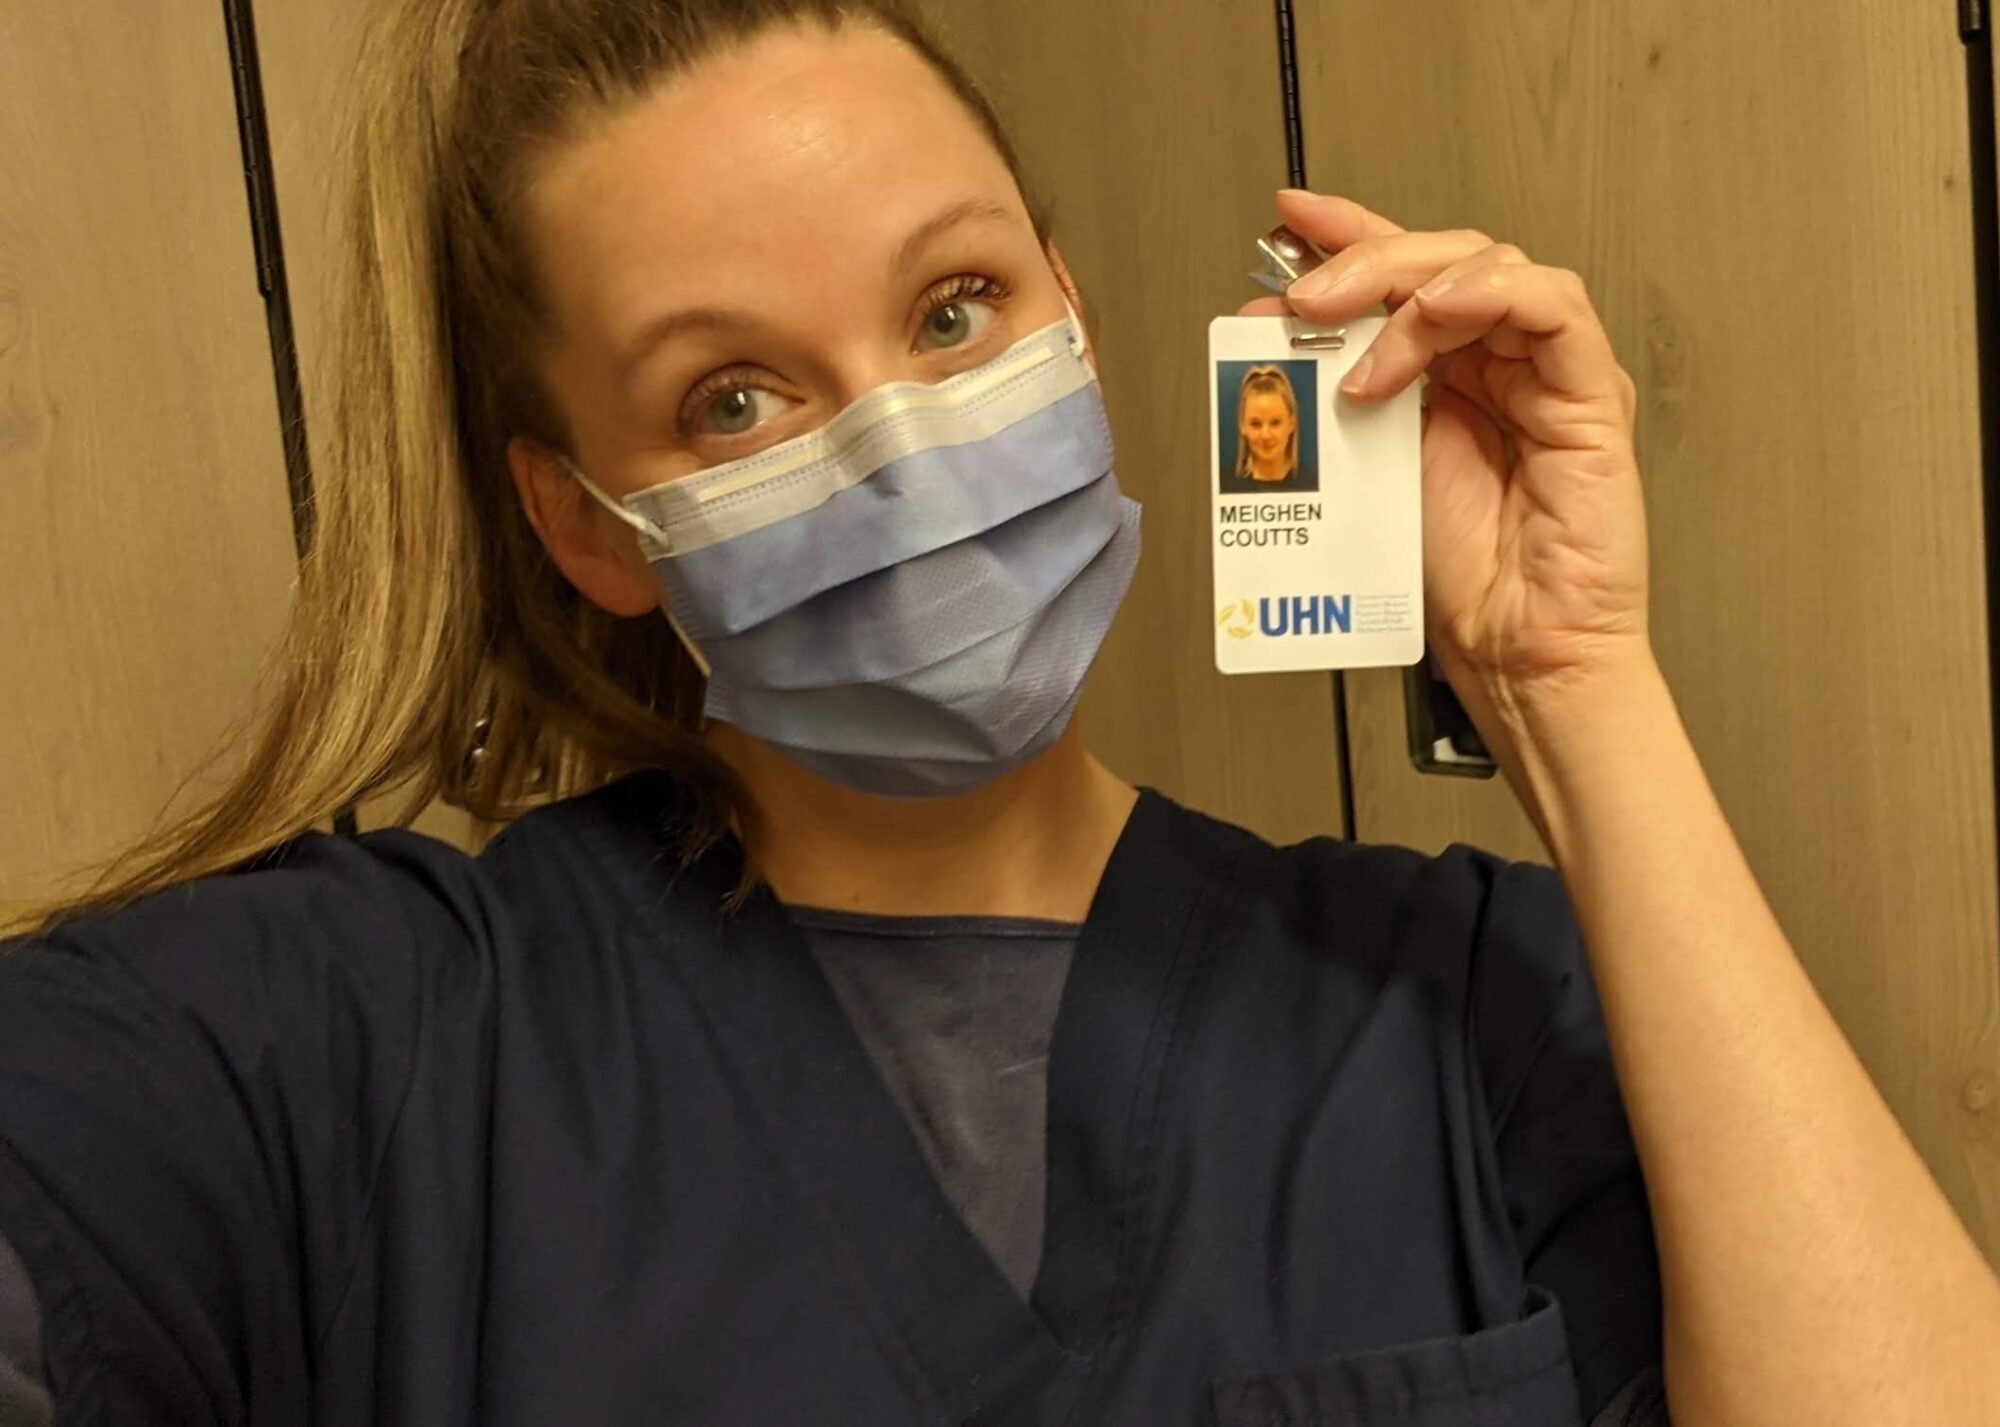 Meighen Coutts holding her UHN badge